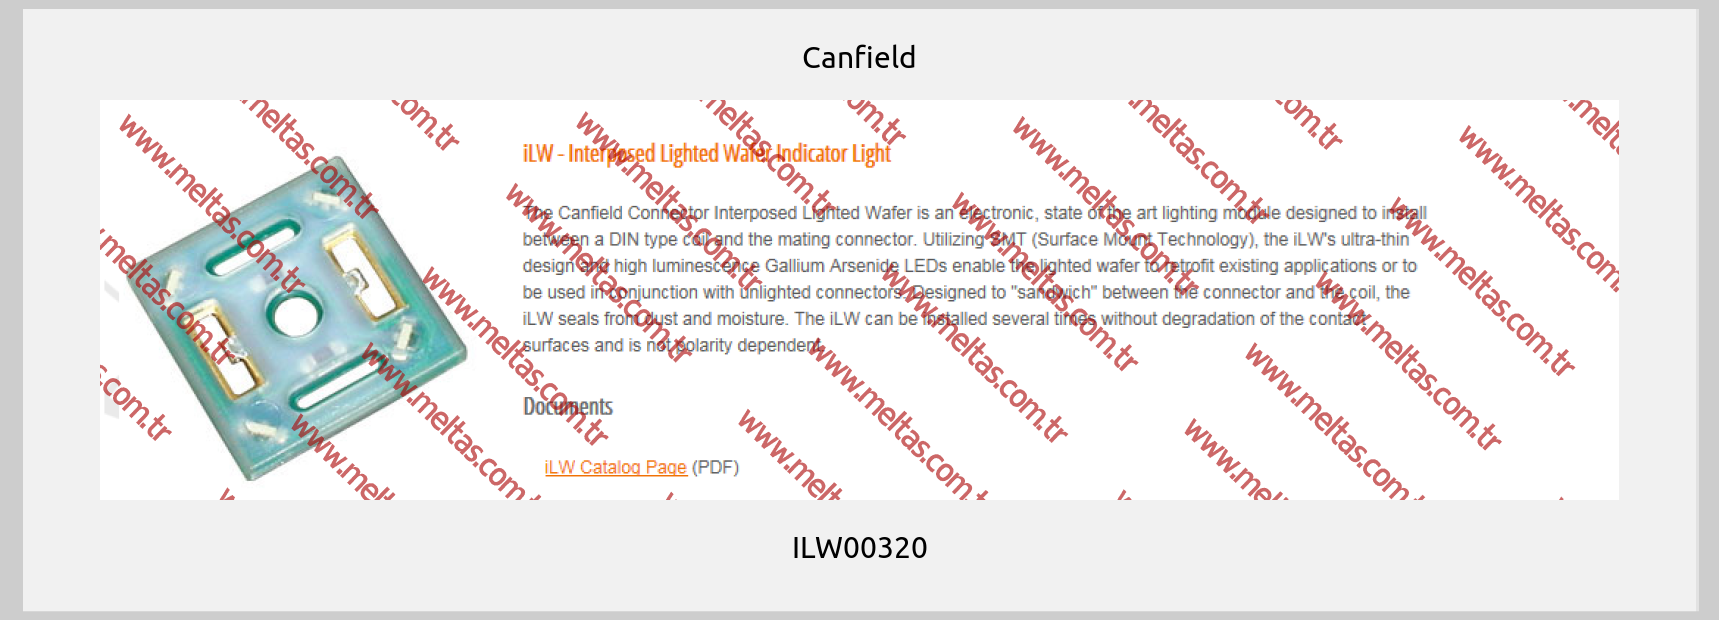 Canfield-ILW00320